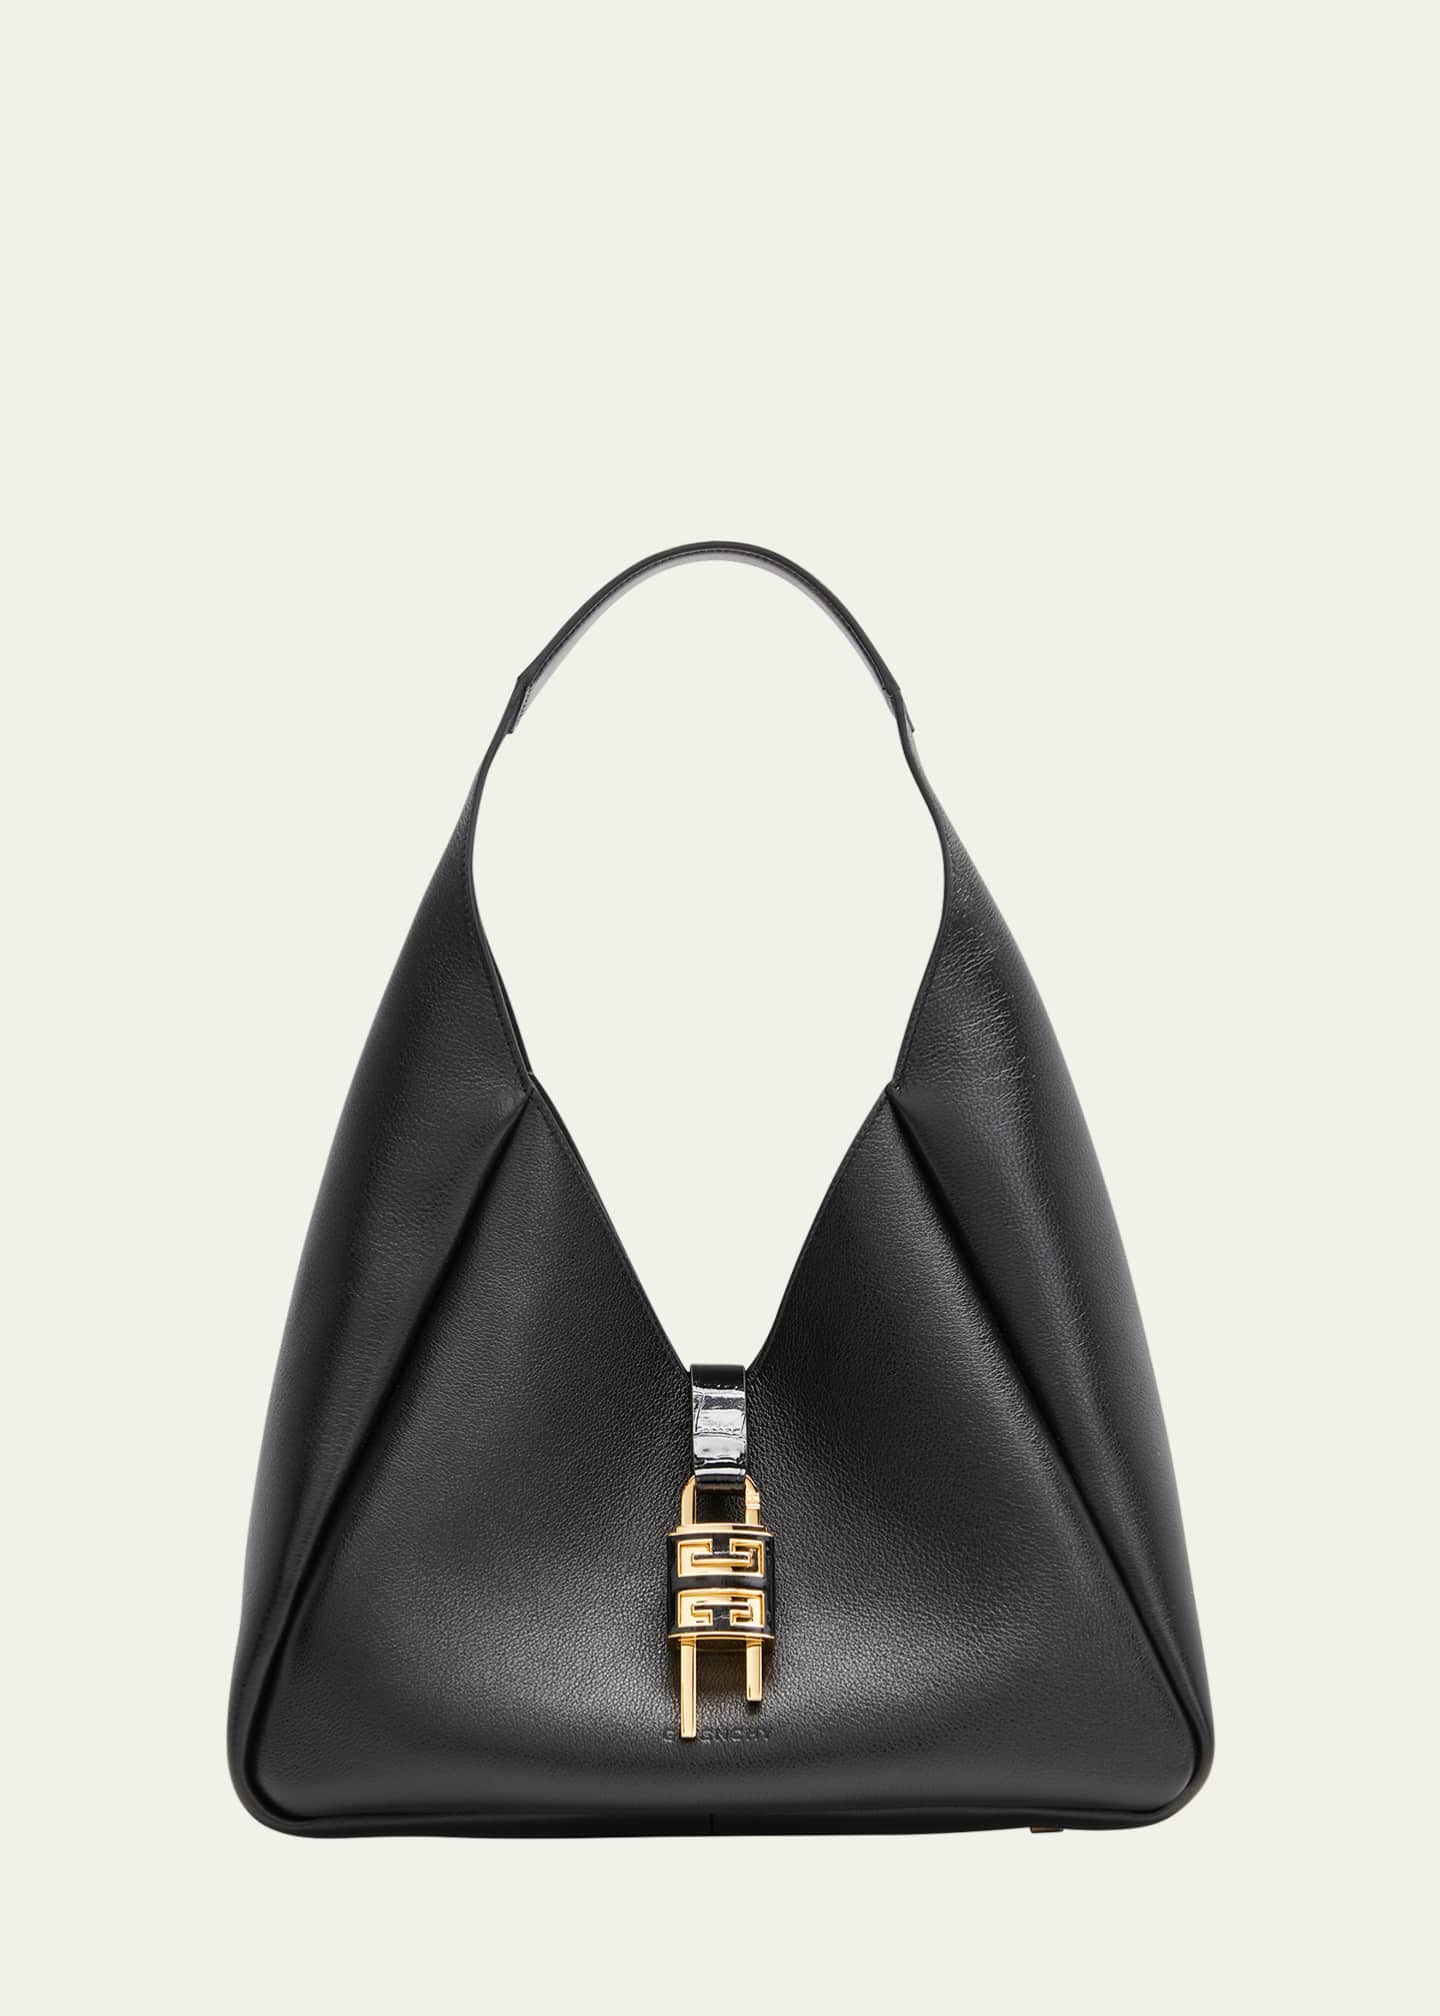 Shop Hobo Style Leather Luxe Handbags For Women Online